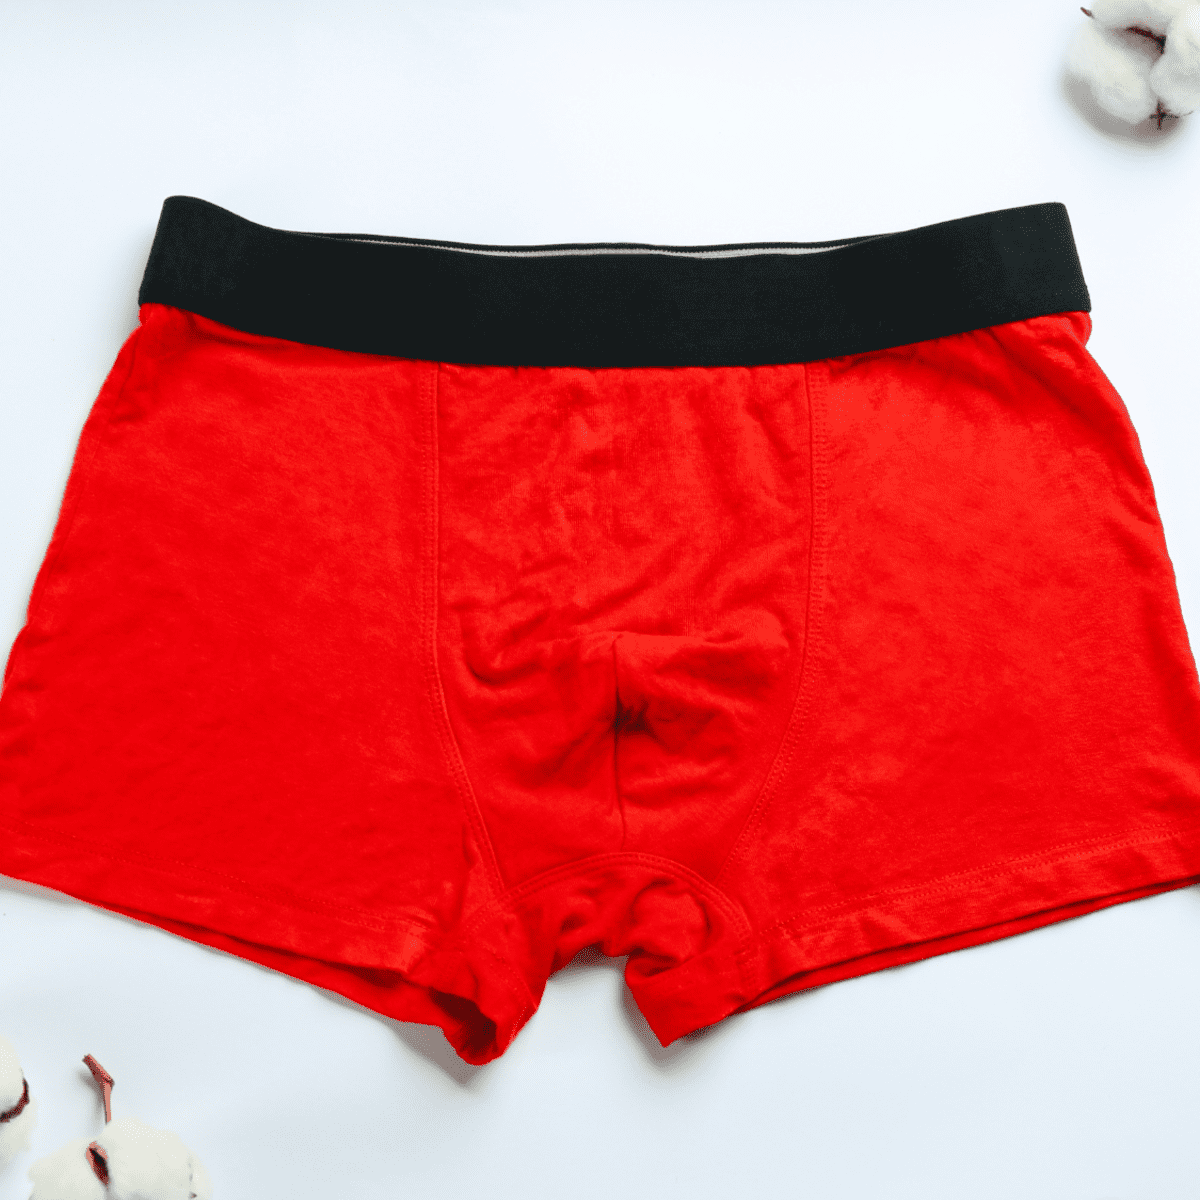 Americans Aren't Changing Underwear Enough, According to New Study